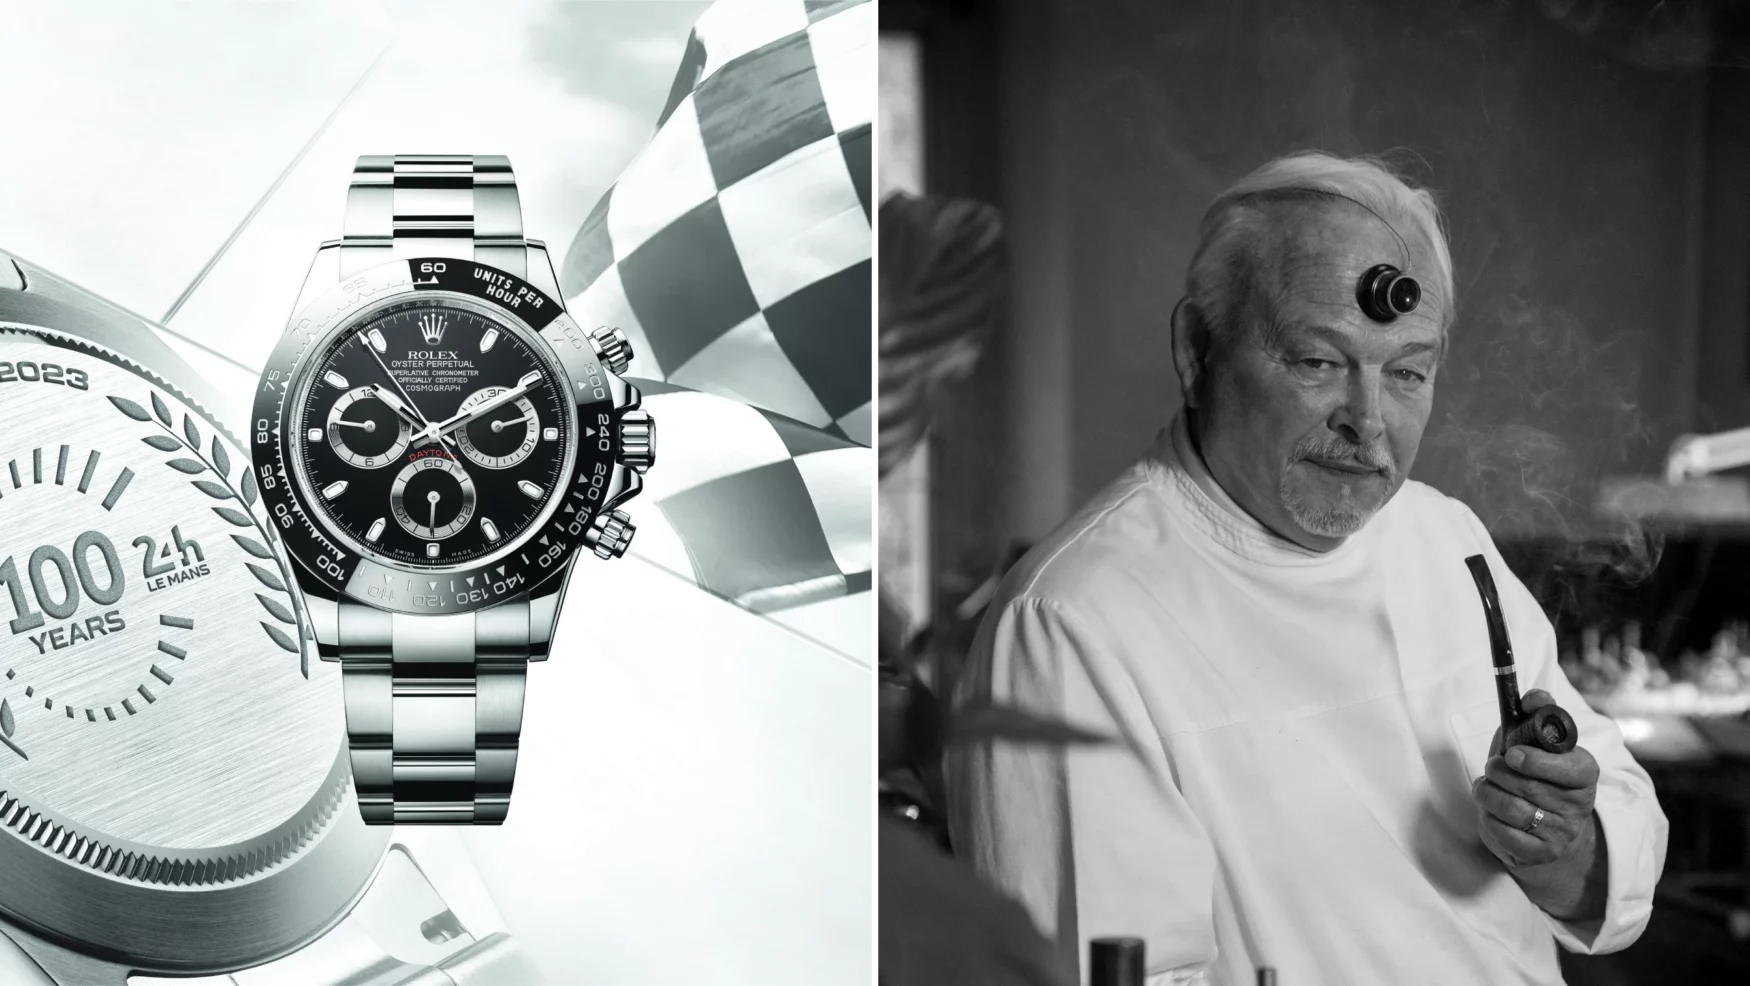 FRIDAY WIND DOWN: Rolex celebrates 100 years of Le Mans, while Philippe Dufour is a birthday boy